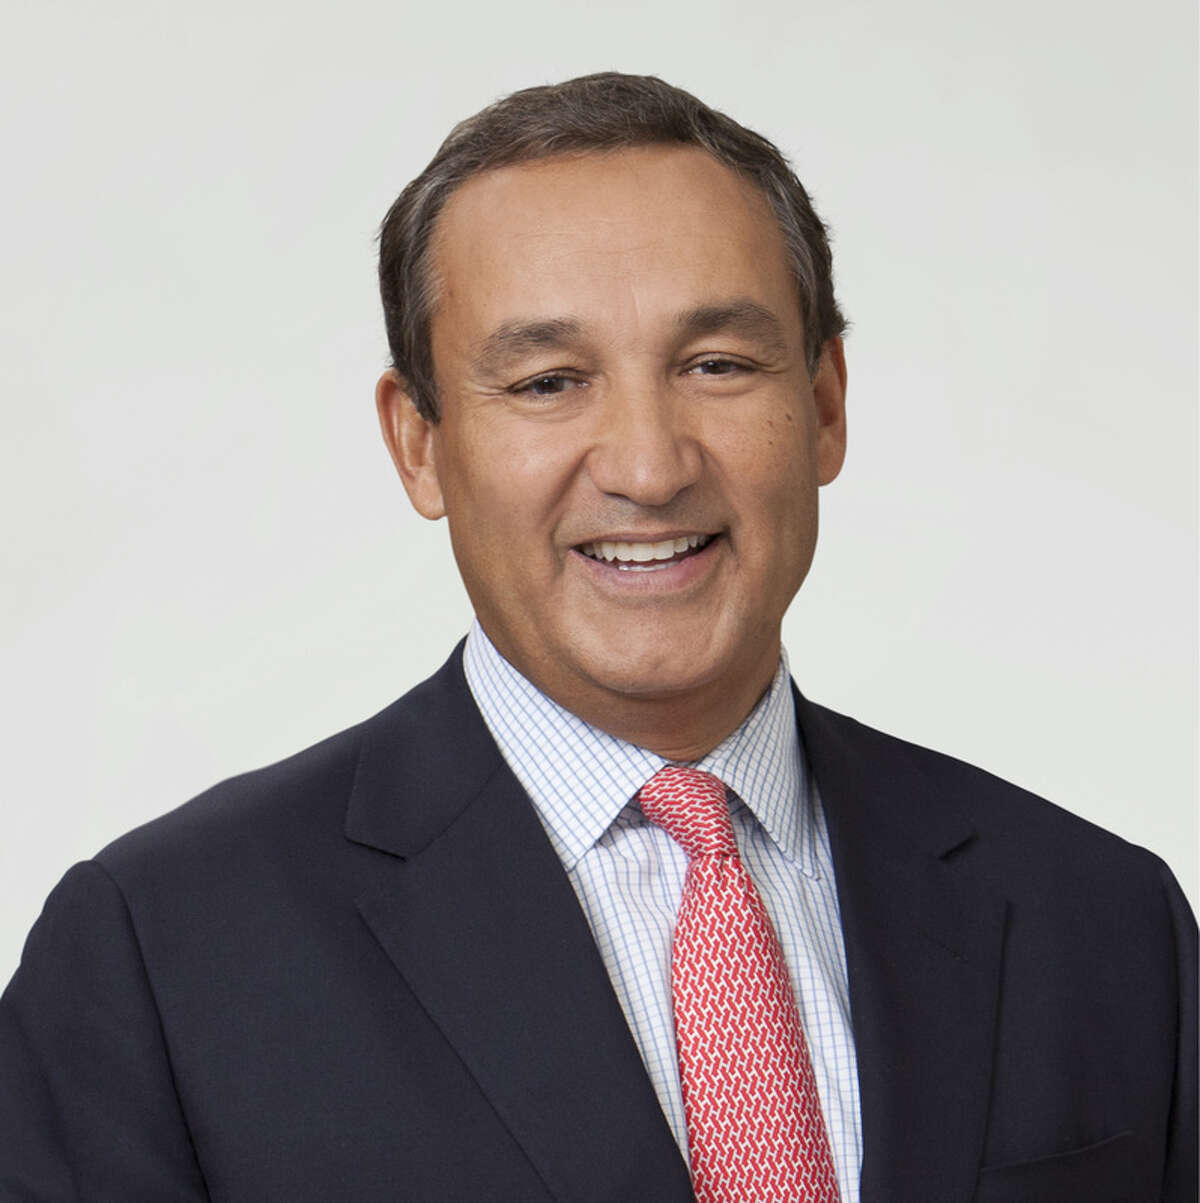 United Airlines names Oscar Munoz Chief Executive Officer. Munoz replaces fired Jeff Smisek.